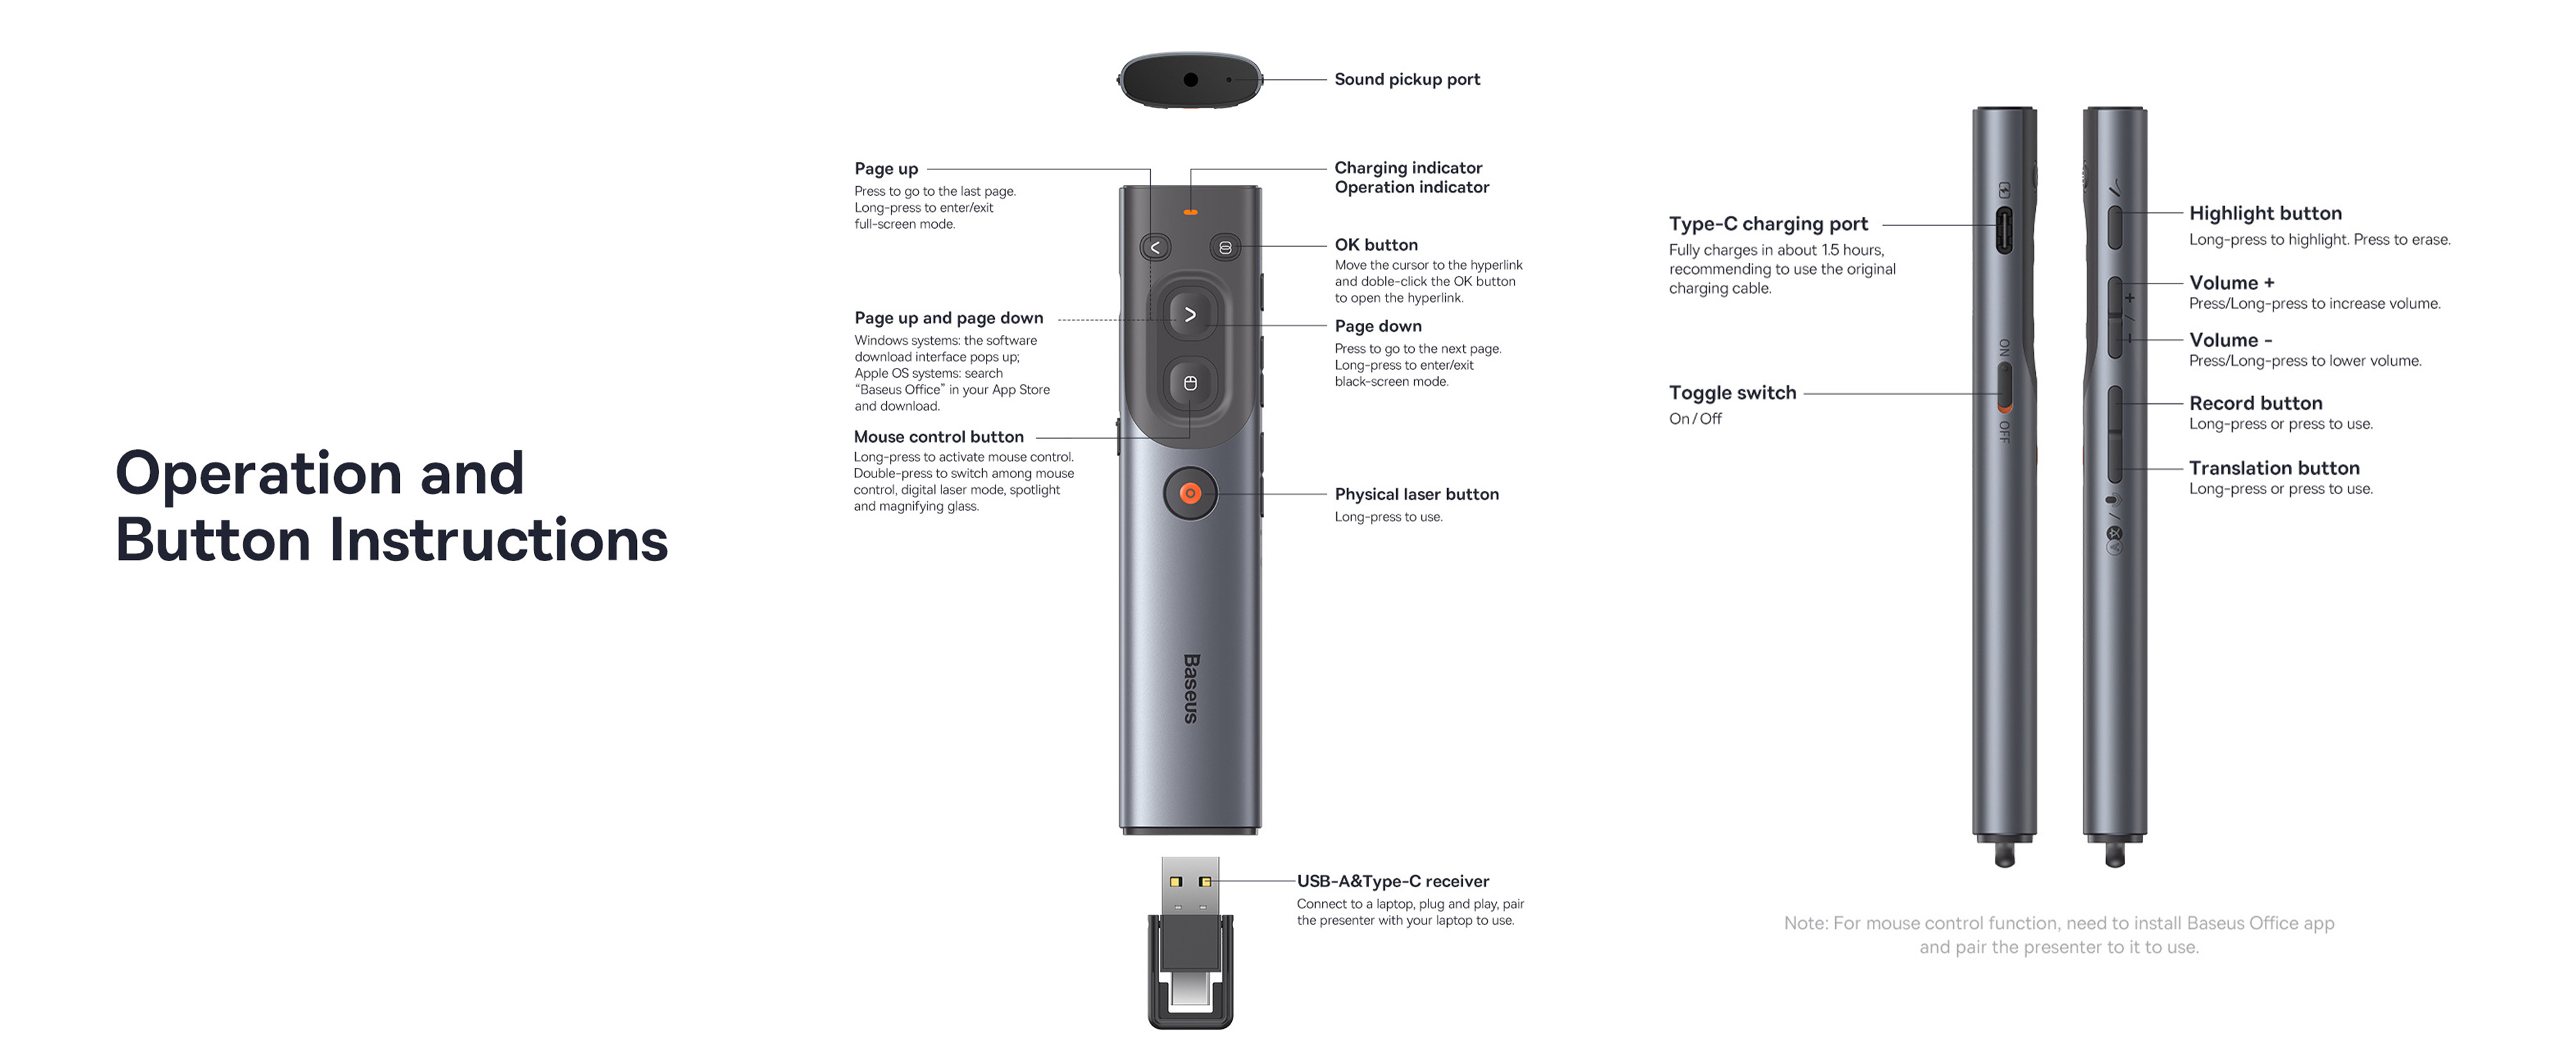 Baseus Orange Dot AI Wireless Presenter (Red Laser) | Rechargeable, Intelligent Voice Recording, Real-Time Voice Translation